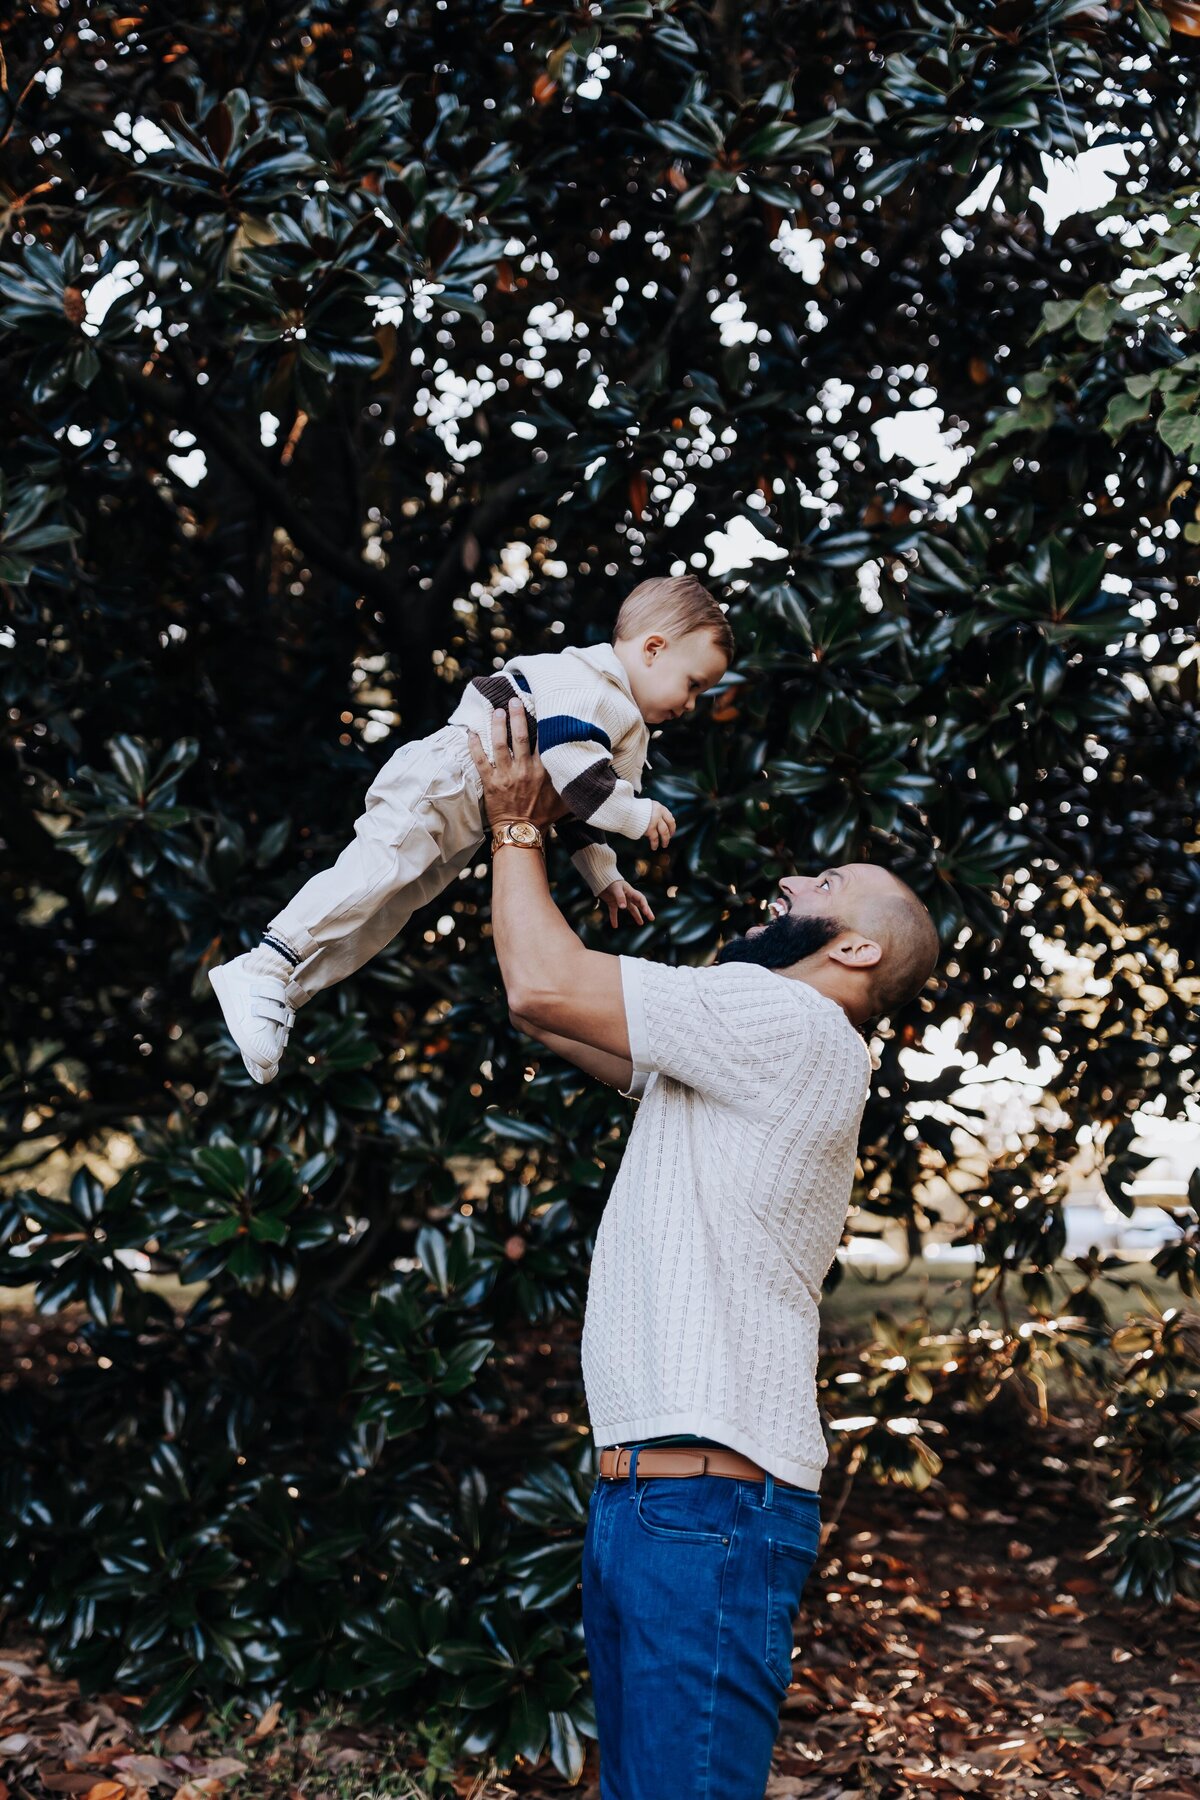 Nashville family photographers capture father lifting child during outdoor photos